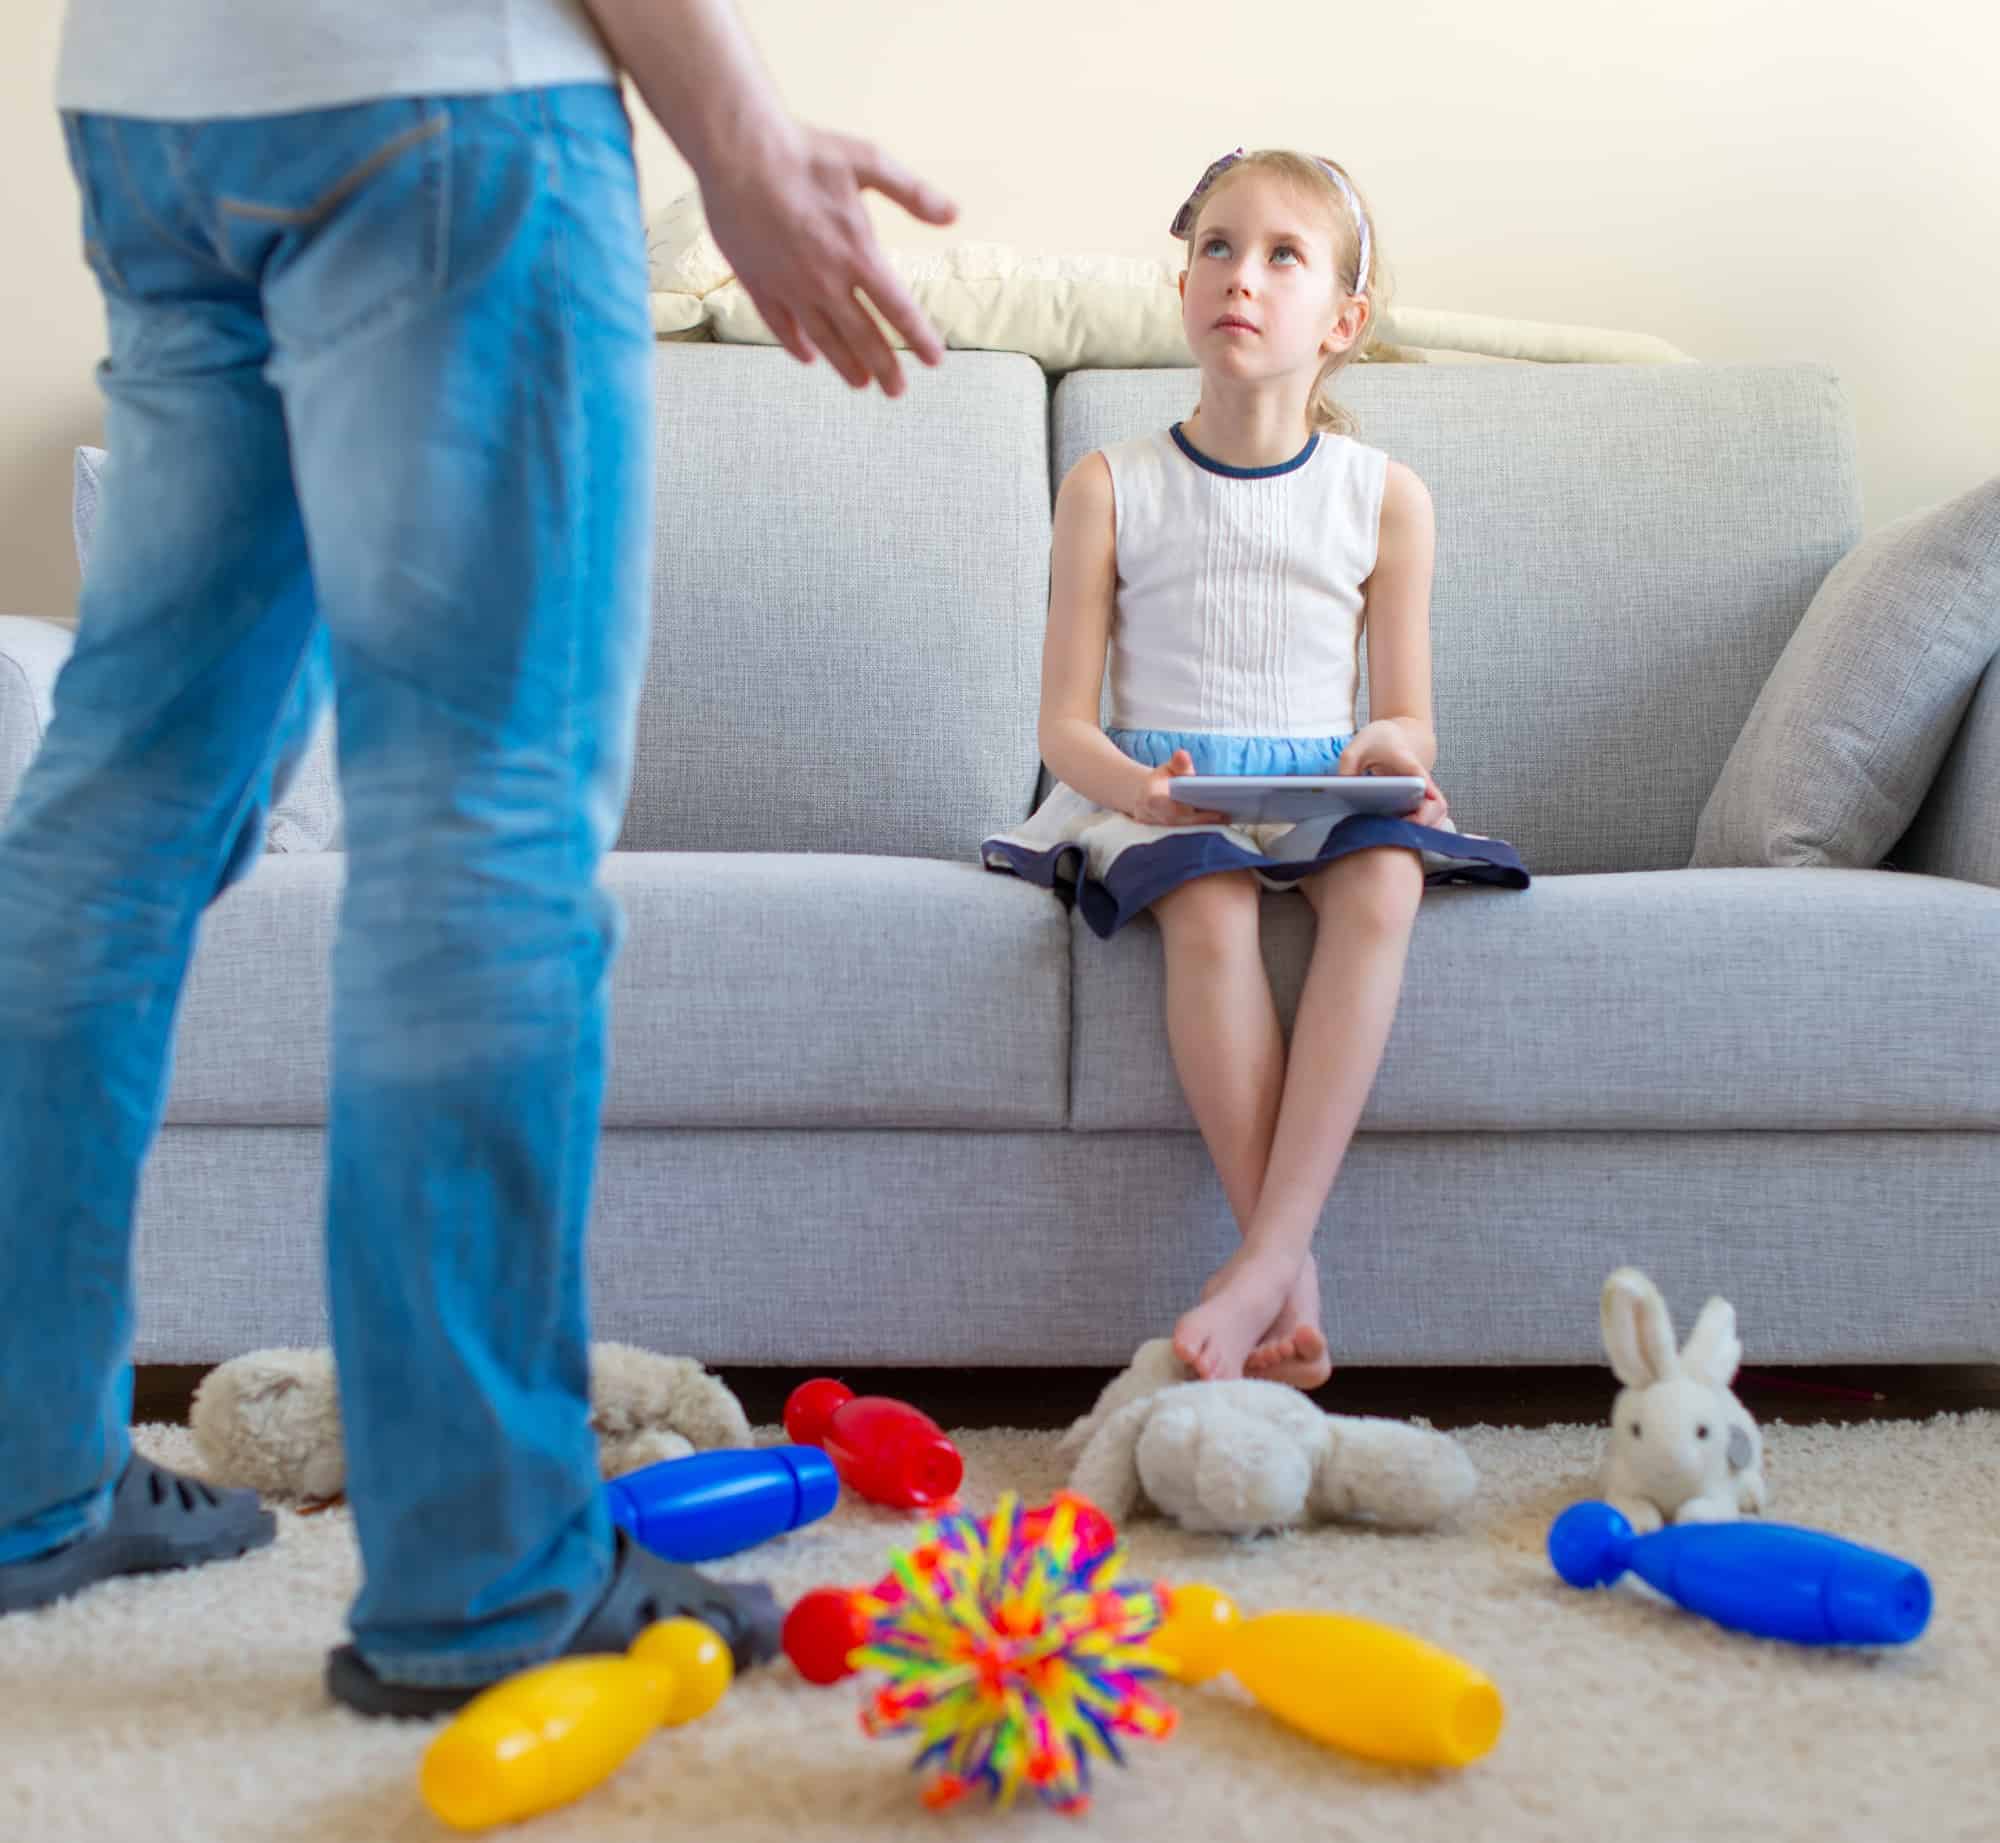 Girl sitting in couch with toys strewn about and ignoring her father.